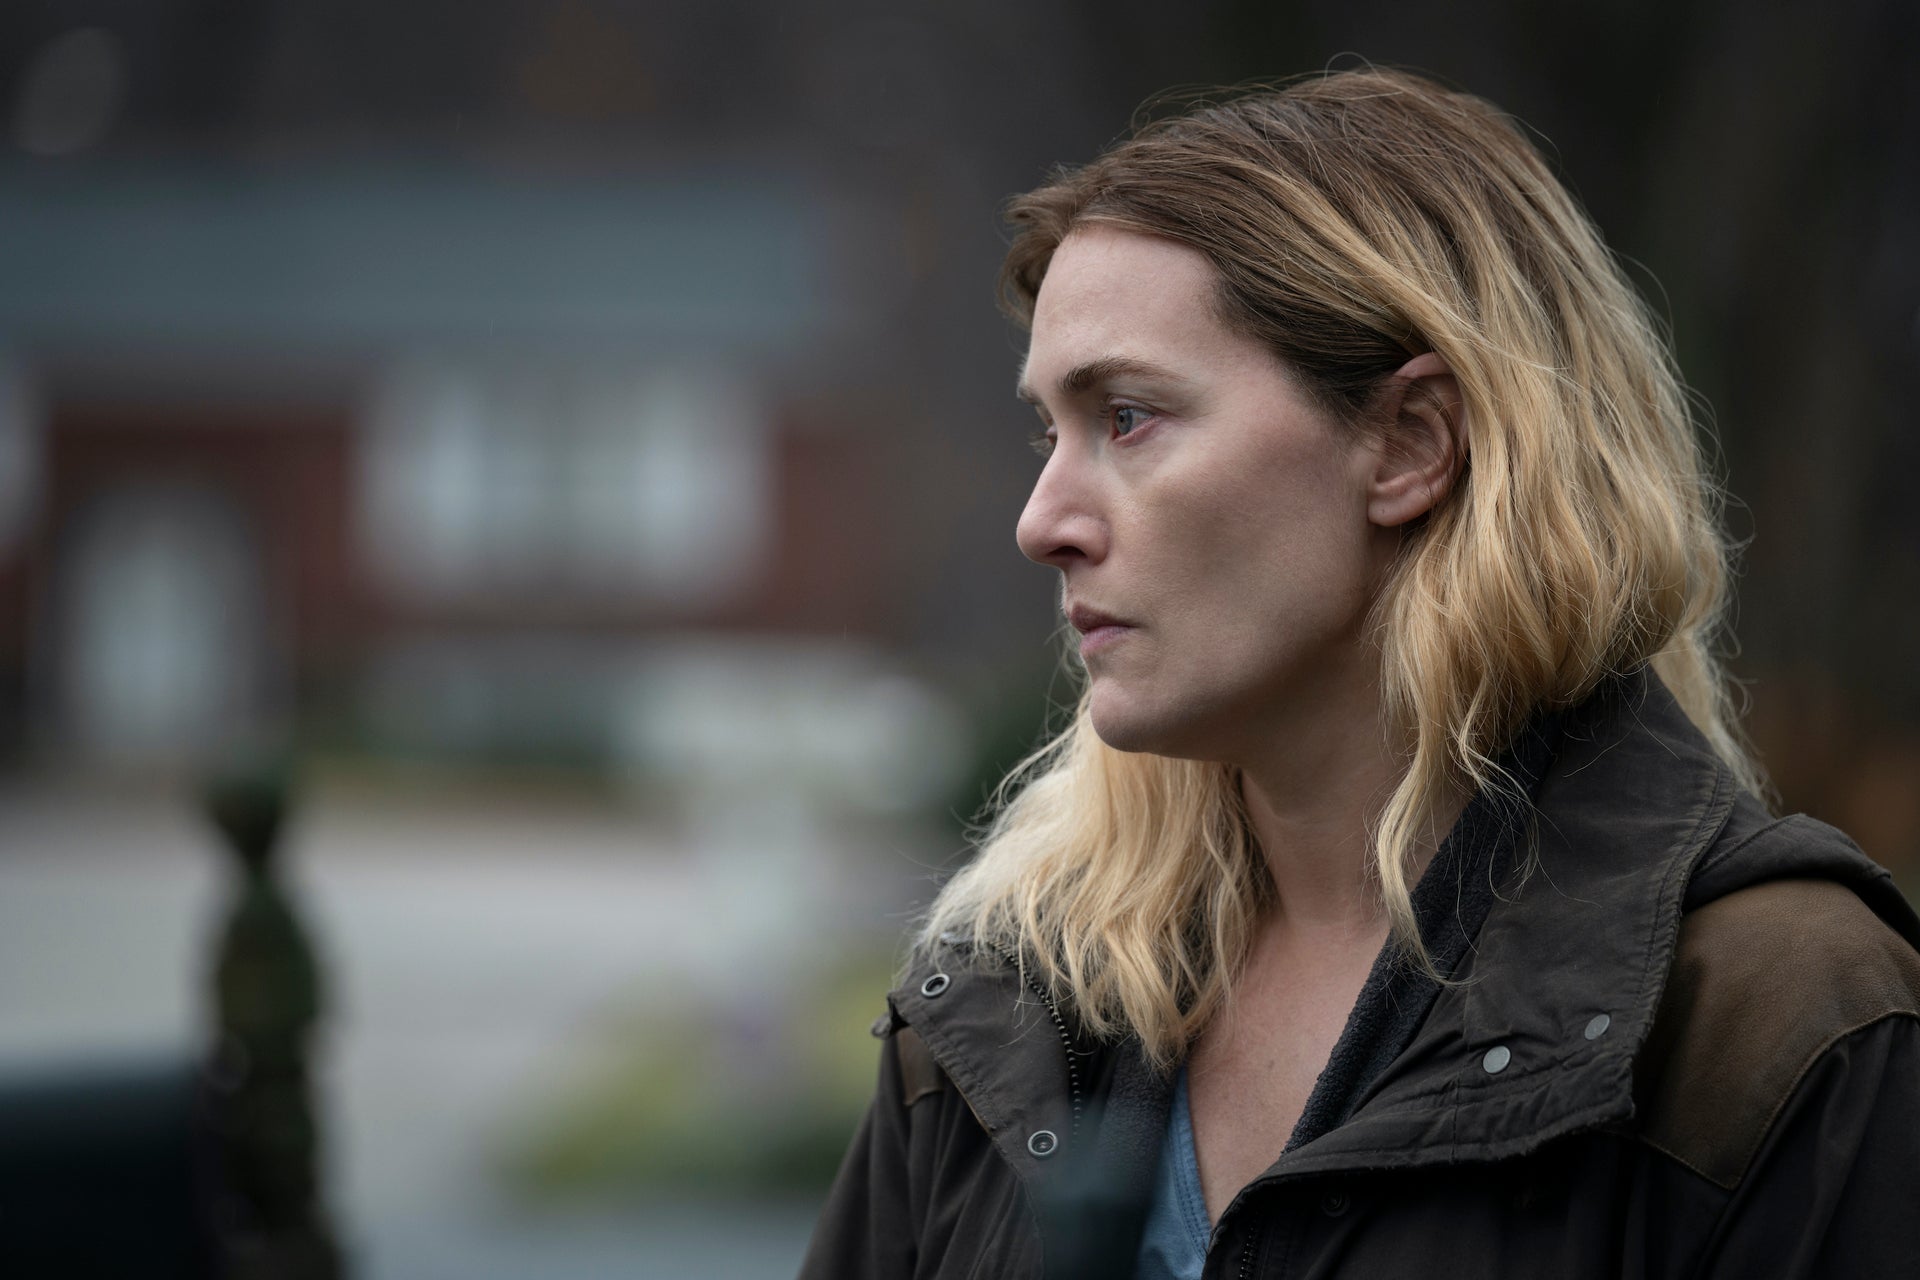 Side profile of Kate Winslet as Mare looking pensive, standing outside in a jacket